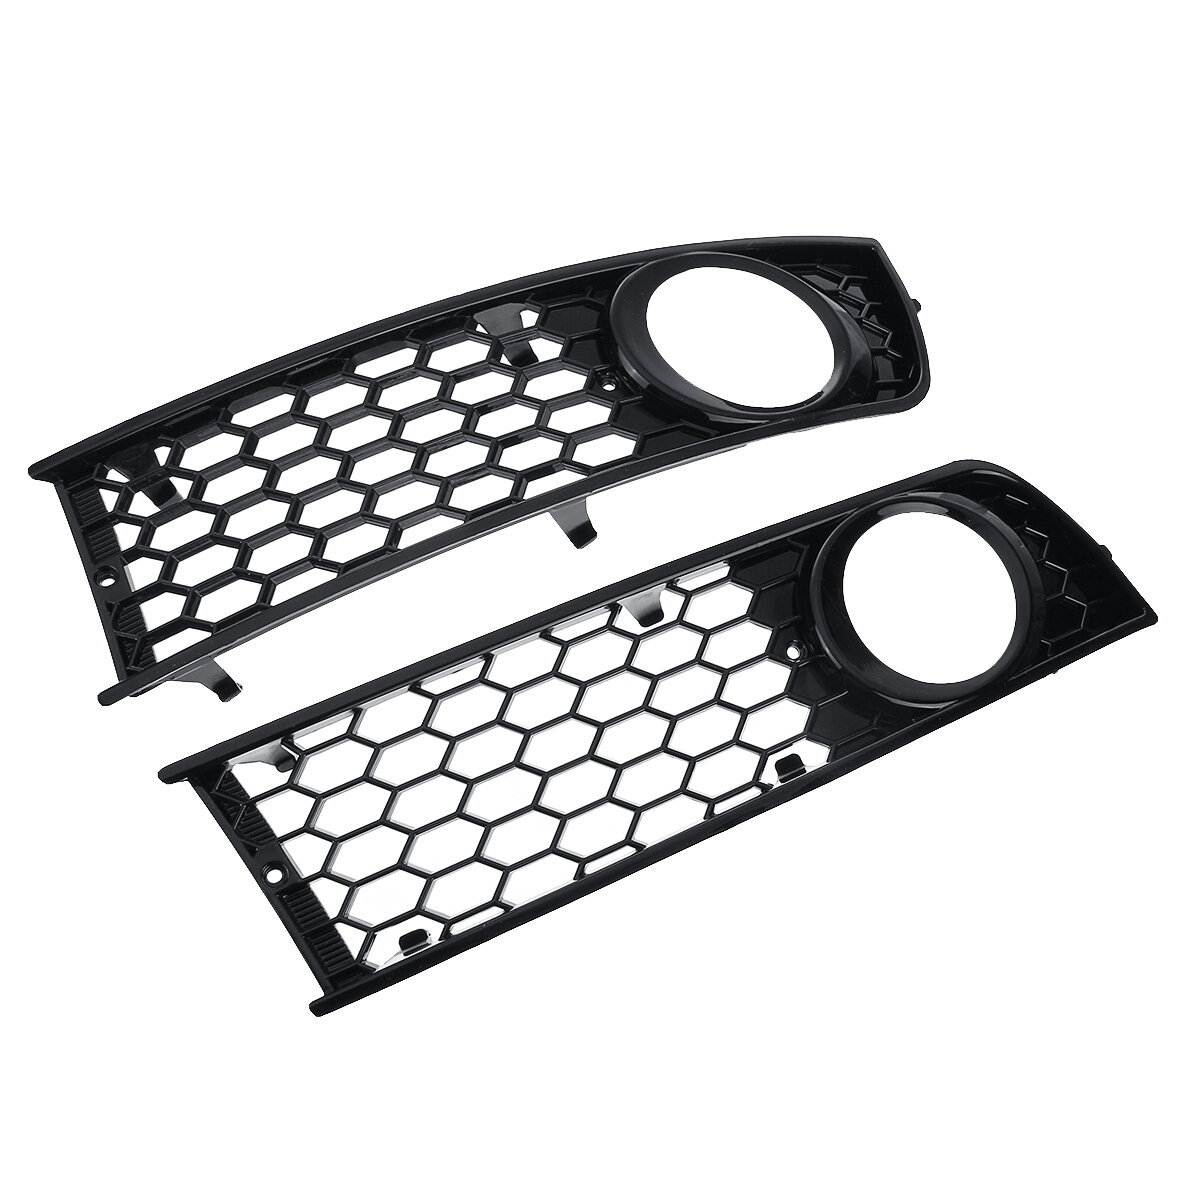 New Honeycomb Hex Mesh Frnot Fog Light Open Vent Grill Grille For AUDI A4 B6 2001-2005